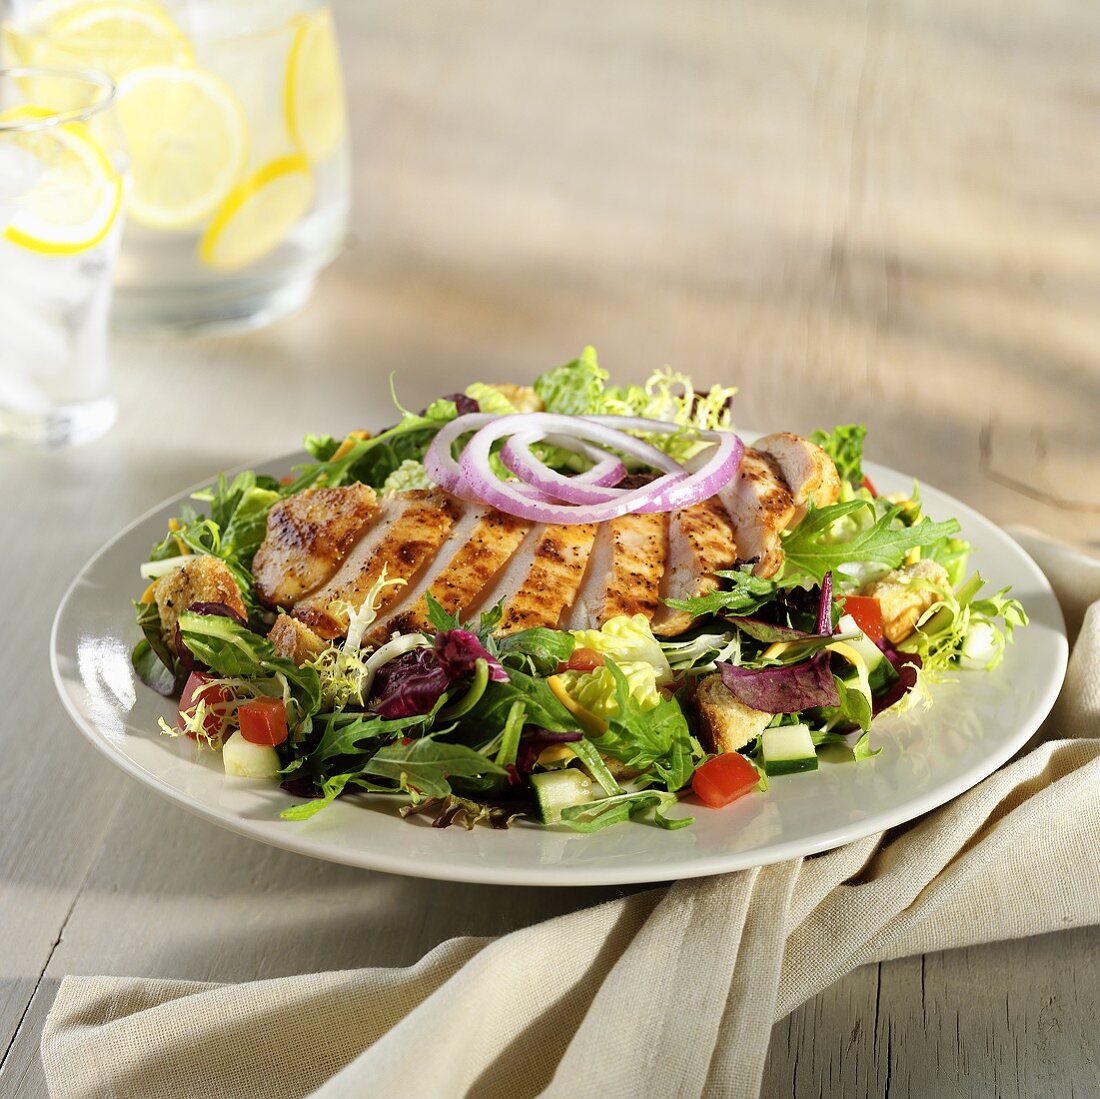 Green salad with grilled chicken breast